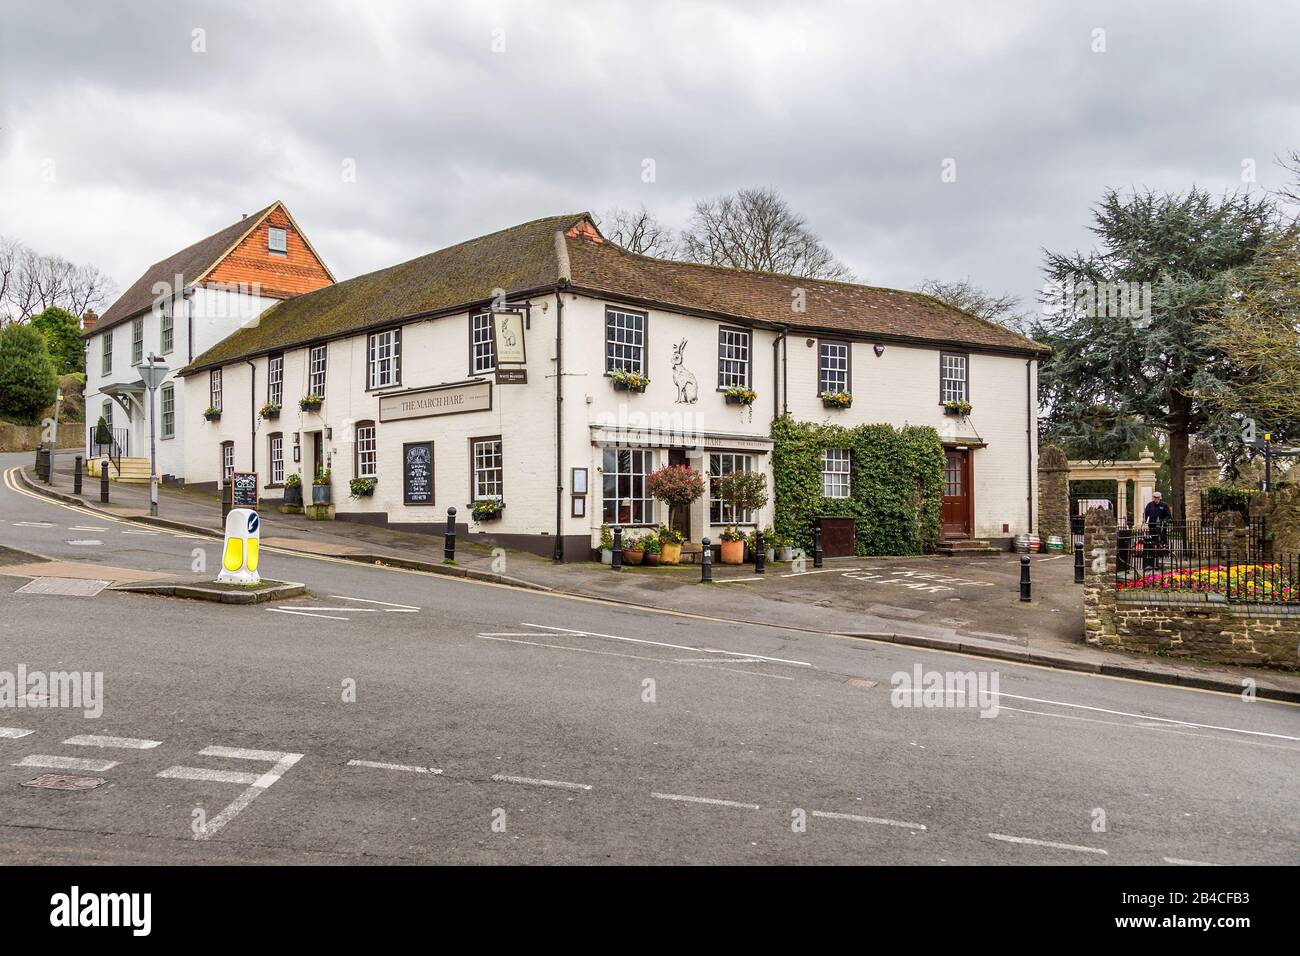 A quaint whitewashed English pub and restaurant named The March Hare. The Castle Square, Guildford, Surrey, England. Stock Photo